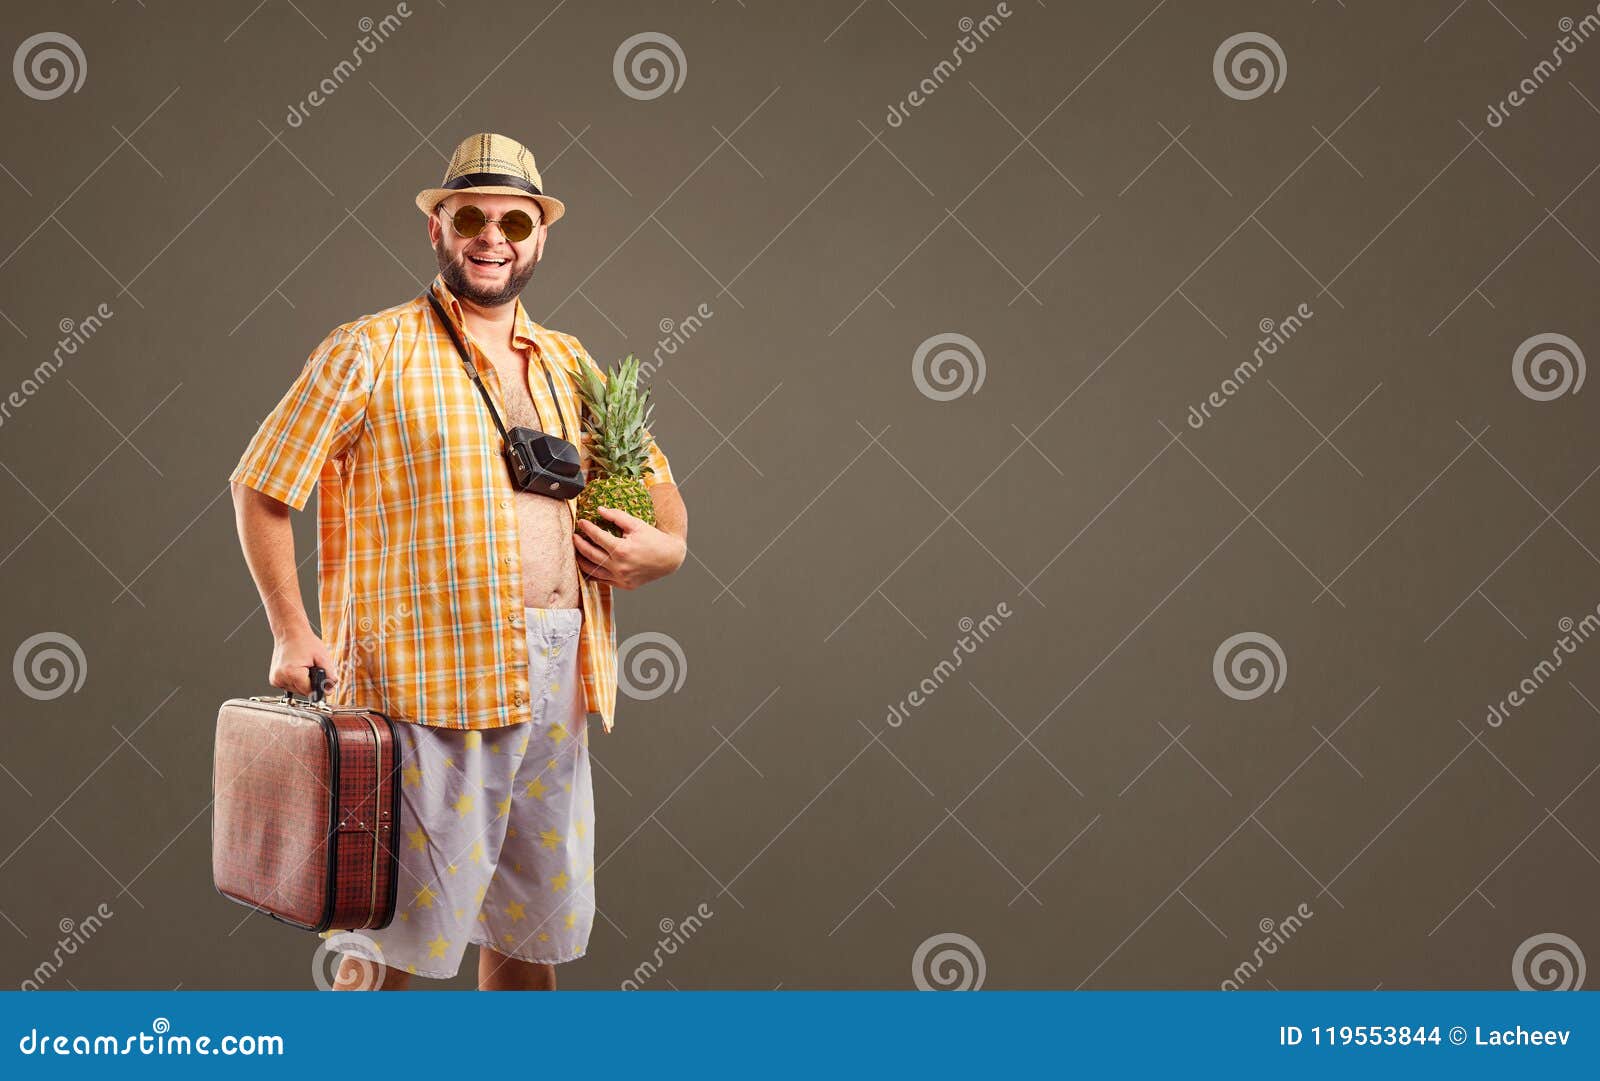 a funny fat bearded tourist with a pineapple and a suitcase smil